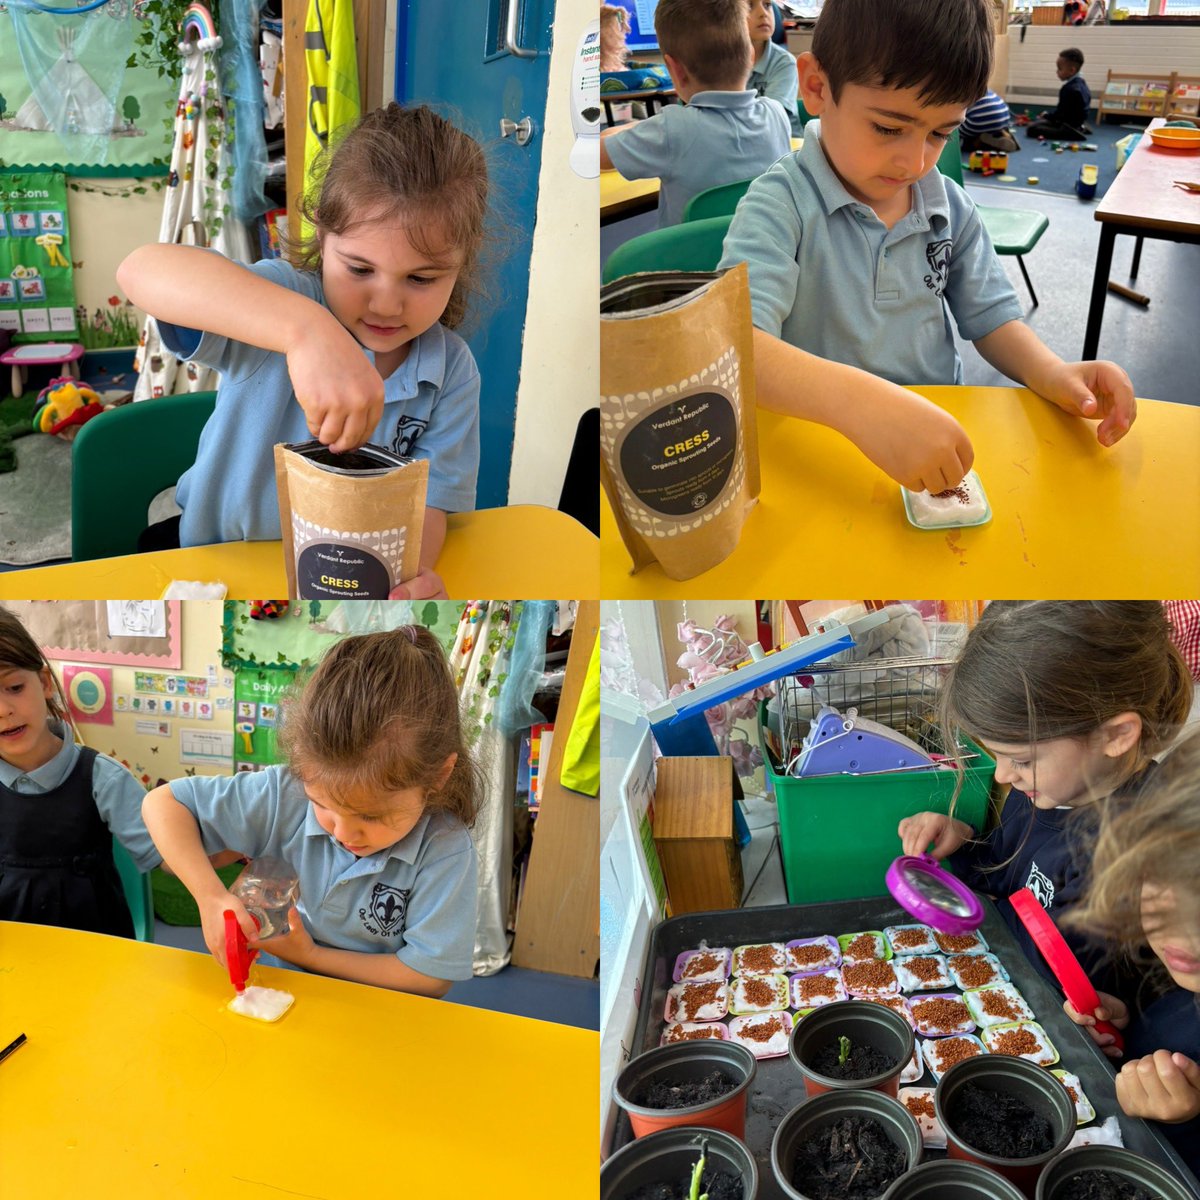 This week the children in Reception planted cress seeds as part of their topic on ‘Growing’. They are now excited as they watch them begin to sprout.